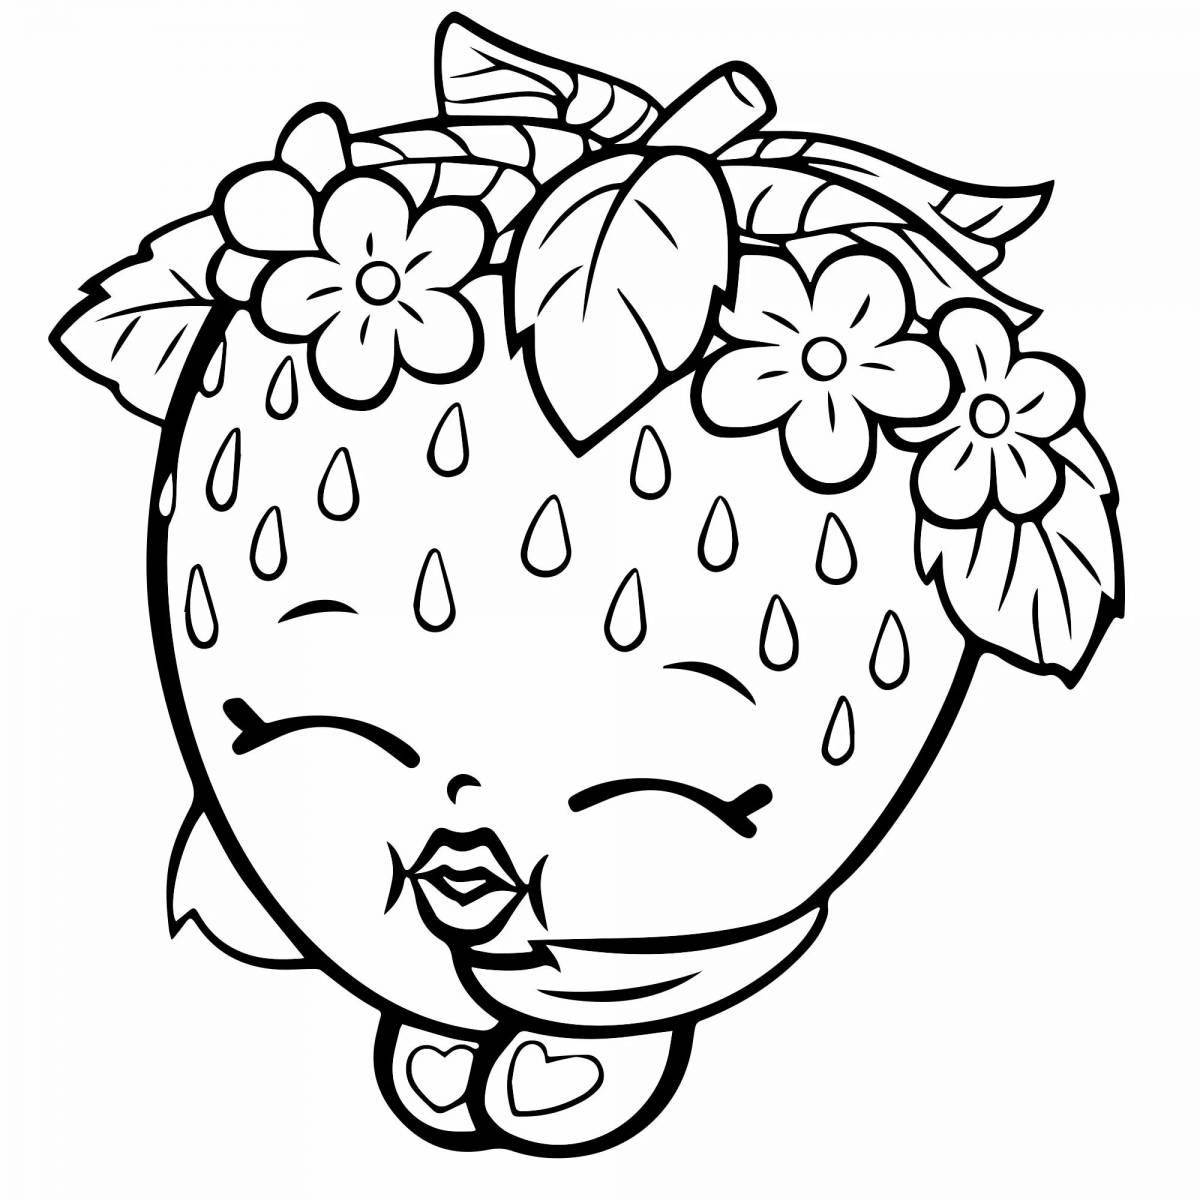 Majestic berry coloring pages